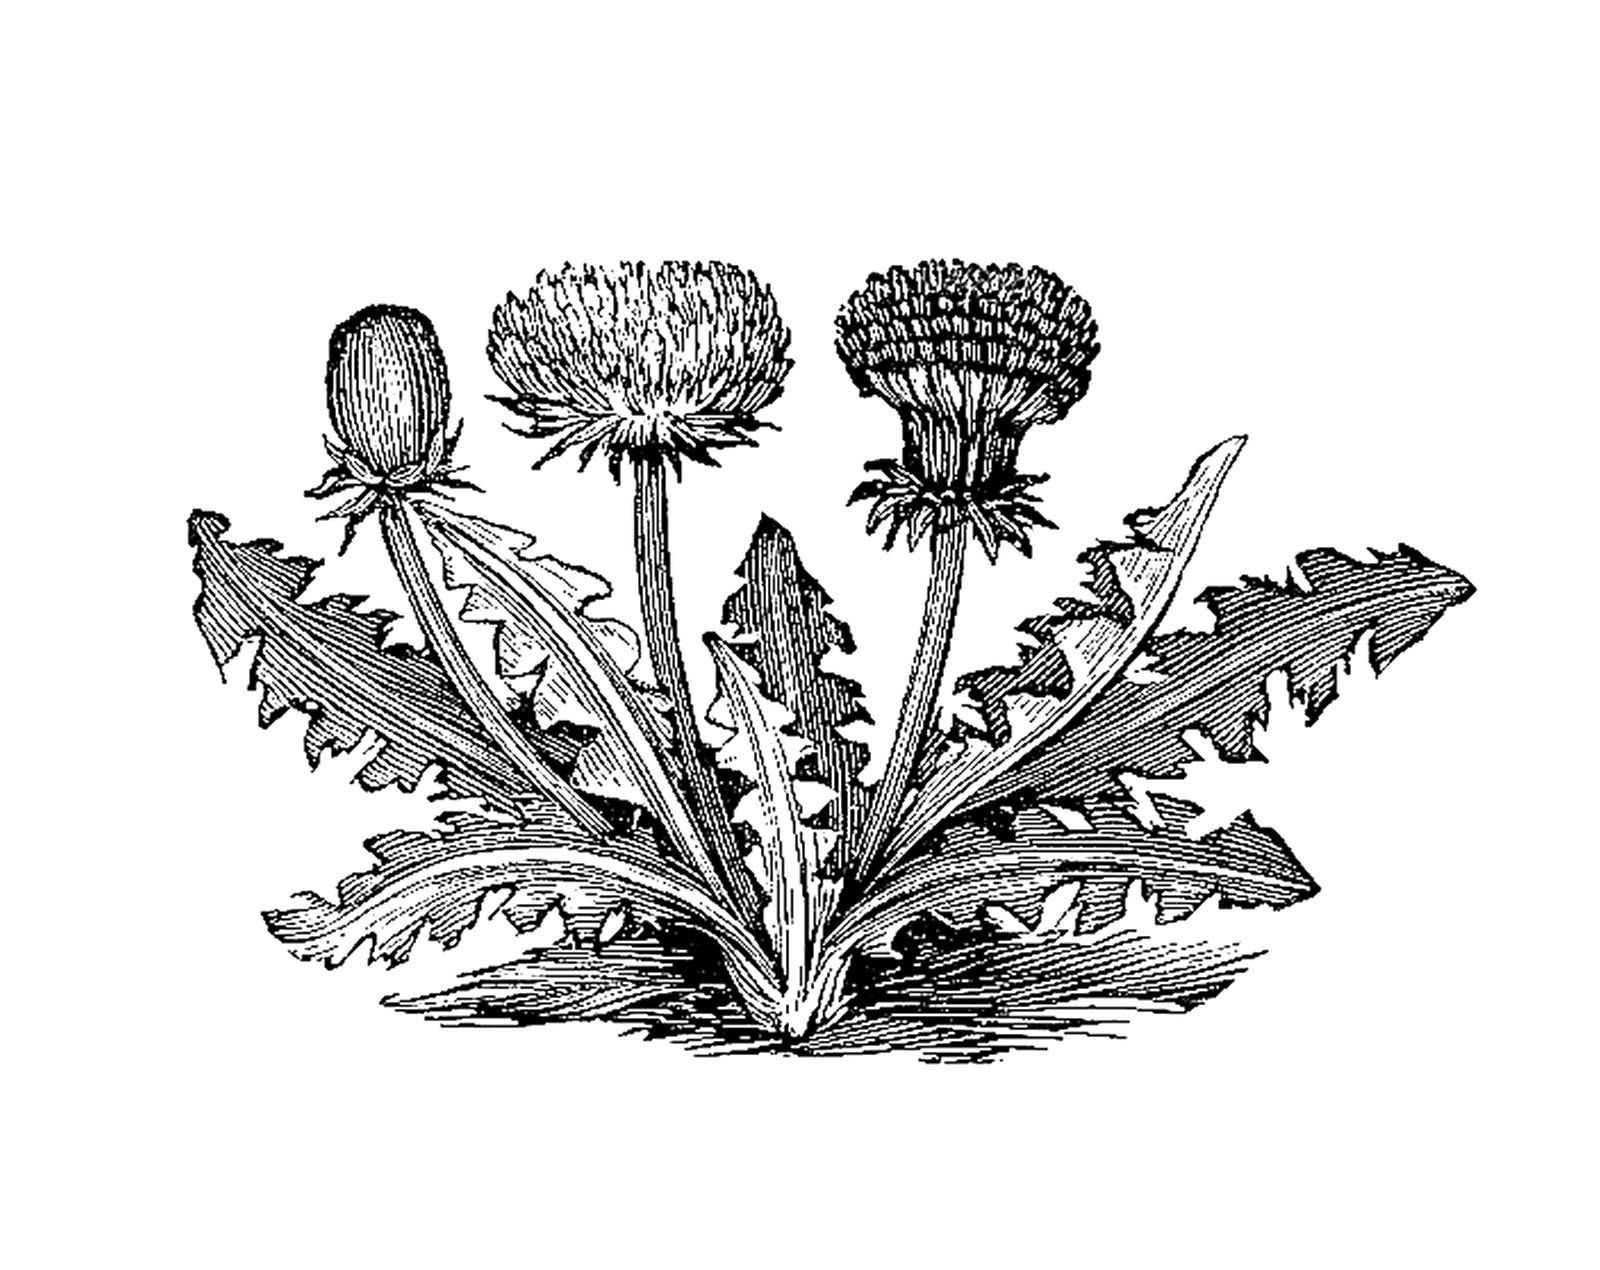 antique-images-free-vintage-botanical-graphic-black-and-white